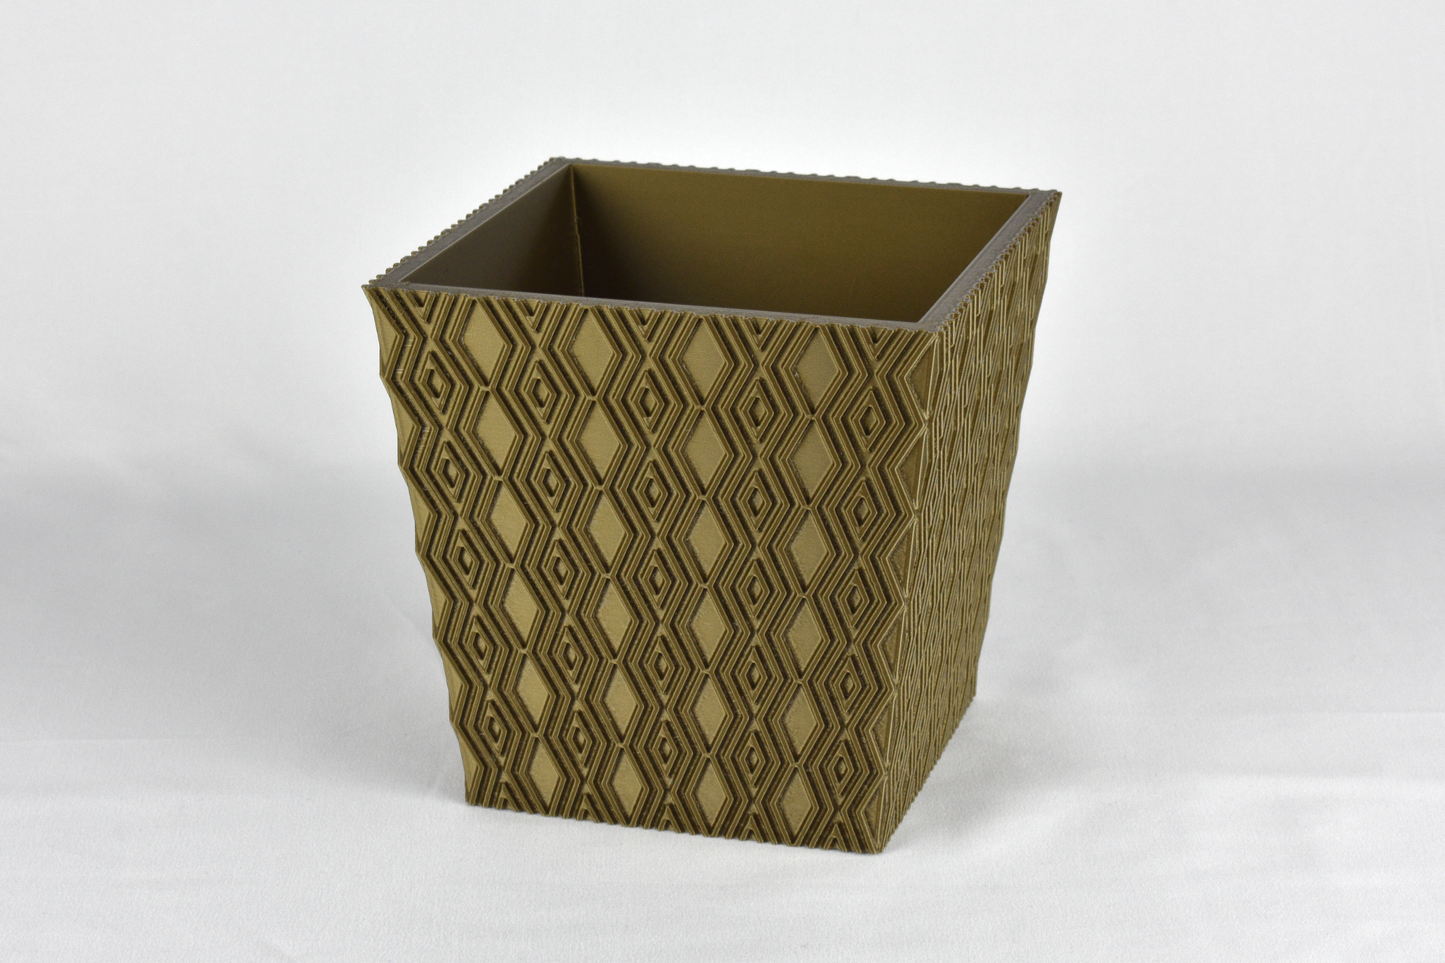 6-inch Square Planter, Geometric Pattern #4, Drainage & Optional Saucer, Outdoor Safe Flower Pot, 30+ Colors